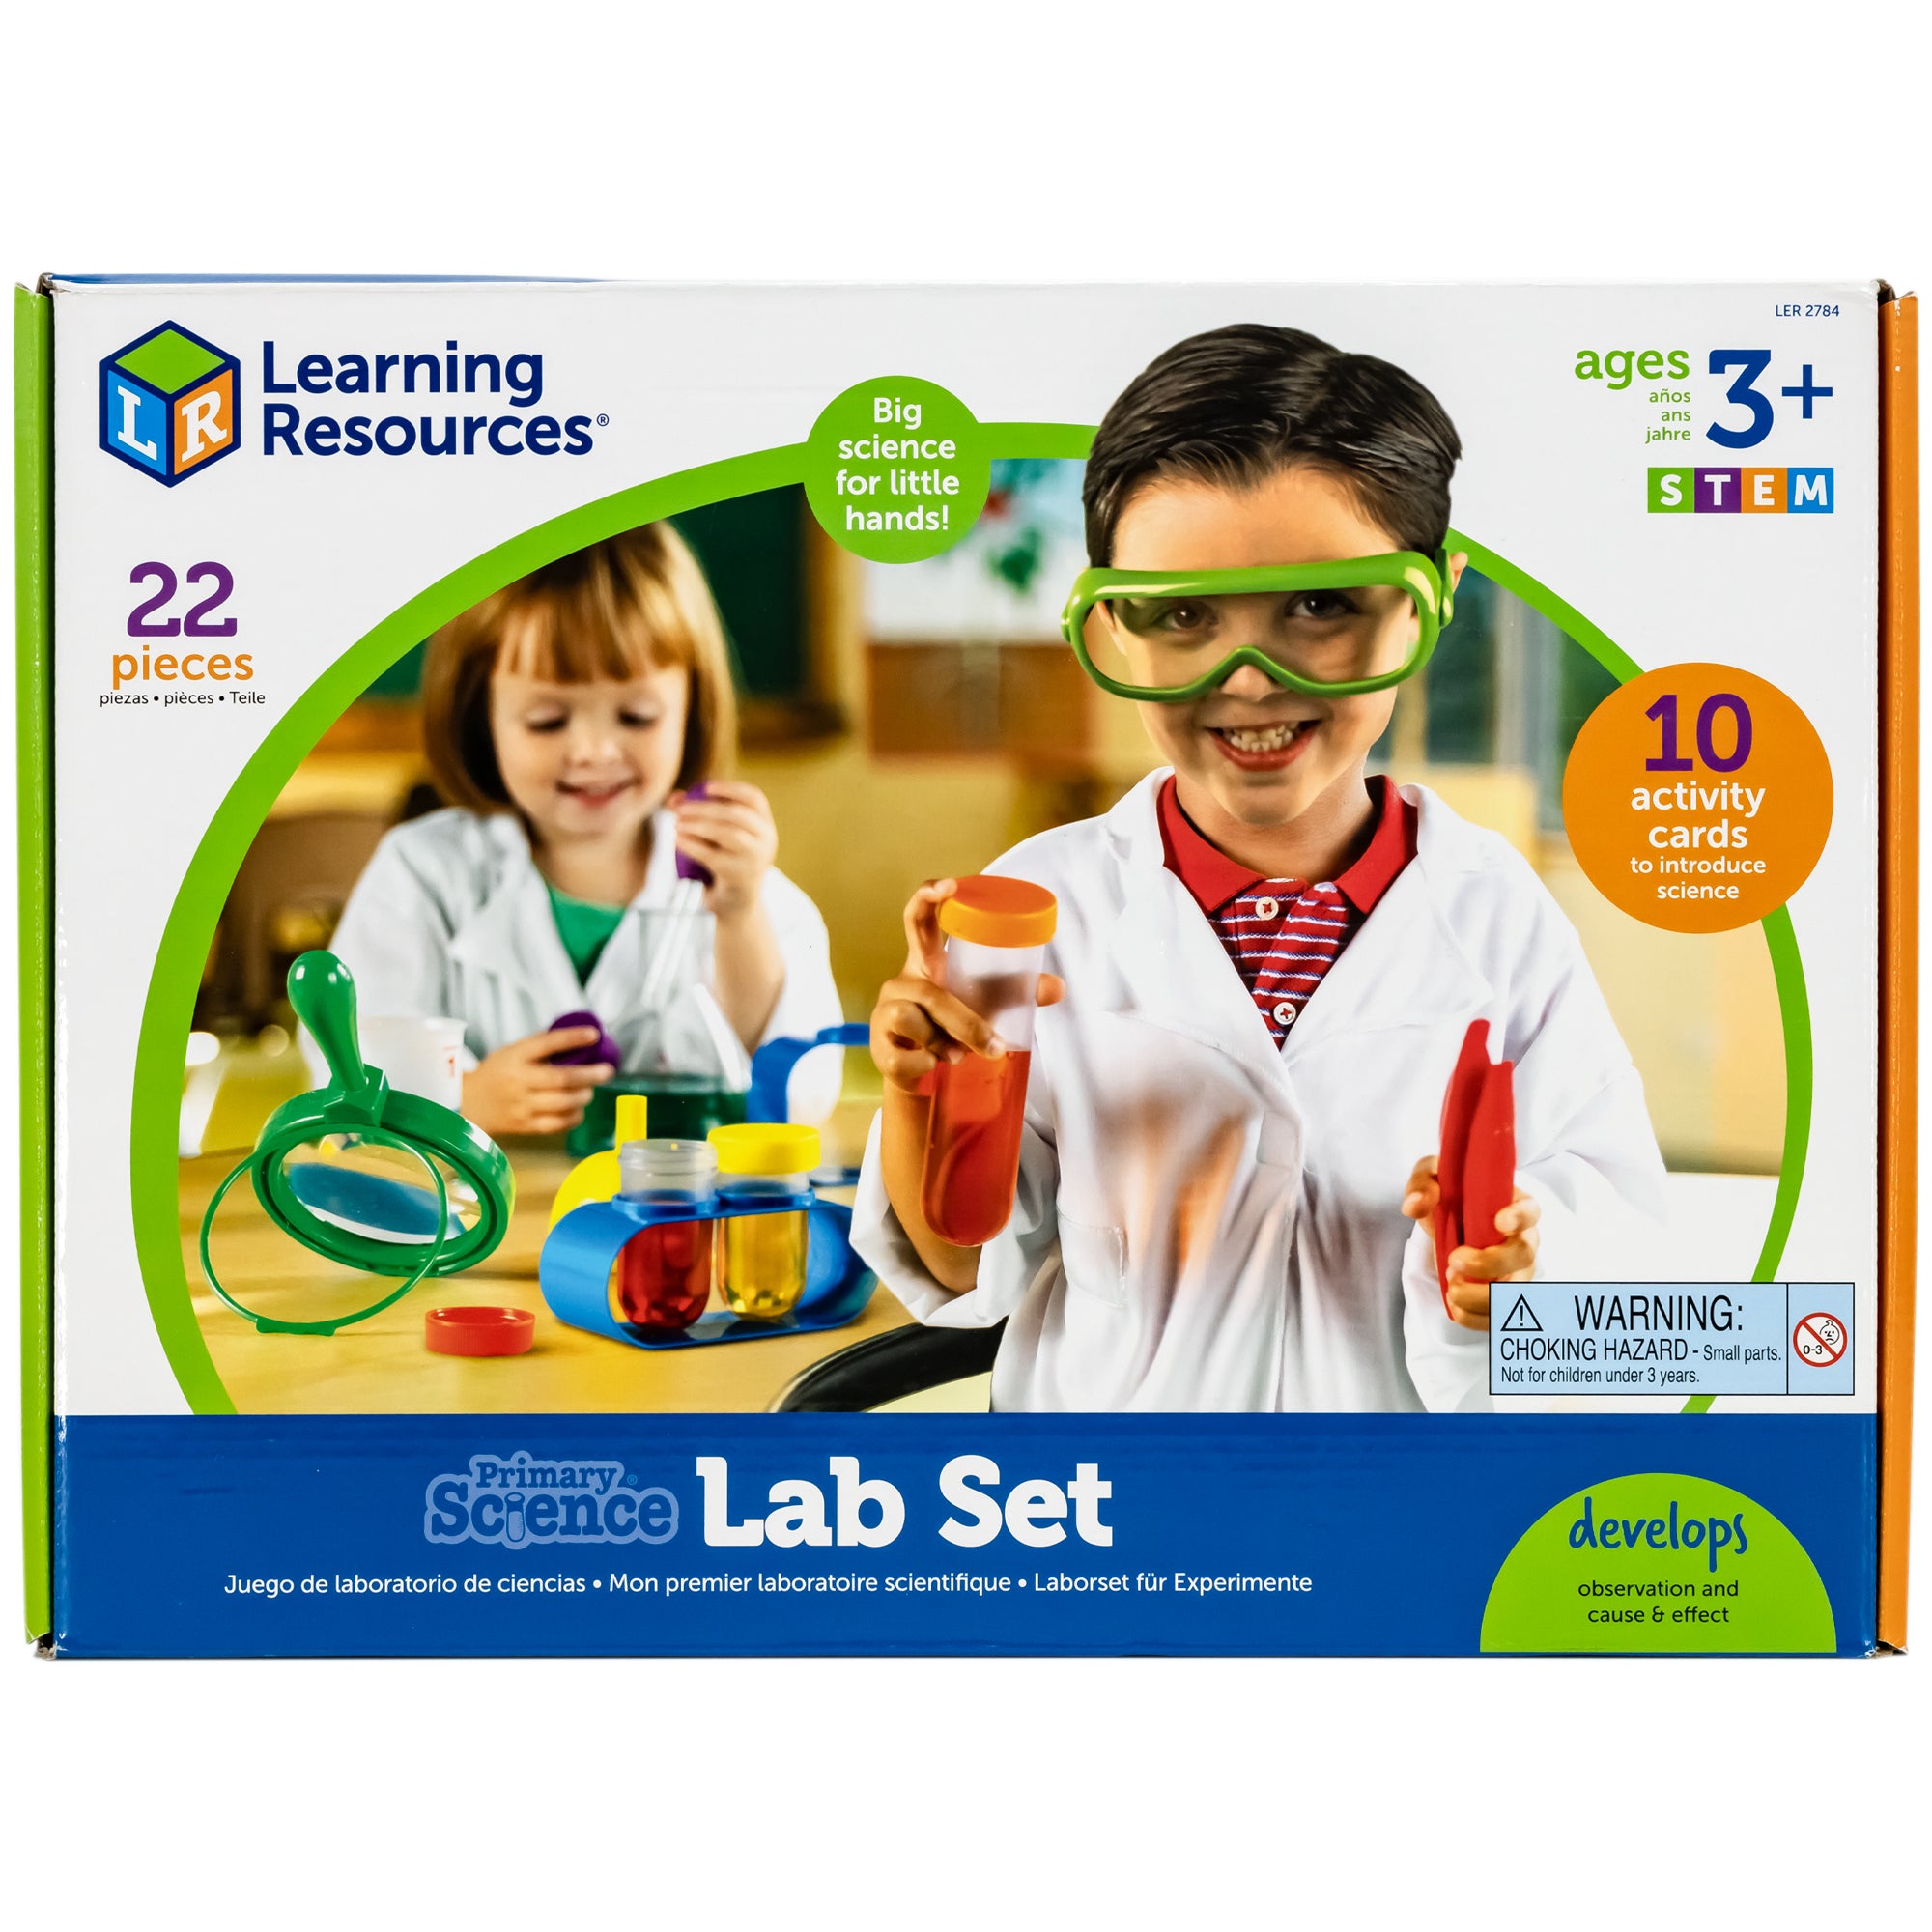 Primary Science Lab Set box cover. Center picture shows 2 children using the lab set items. The boy in the front is holding a test tube with orange liquid and an orange lid in his right hand. He is holding red large tweezers in his right hand and green safety glasses with a white lab coat over a red striped shirt. Behind him is a table with science tools laid out with a girl playing with a beaker and green liquid. She is also wearing a lab coat over a green shirt. 22 pieces with 10 activity cards.